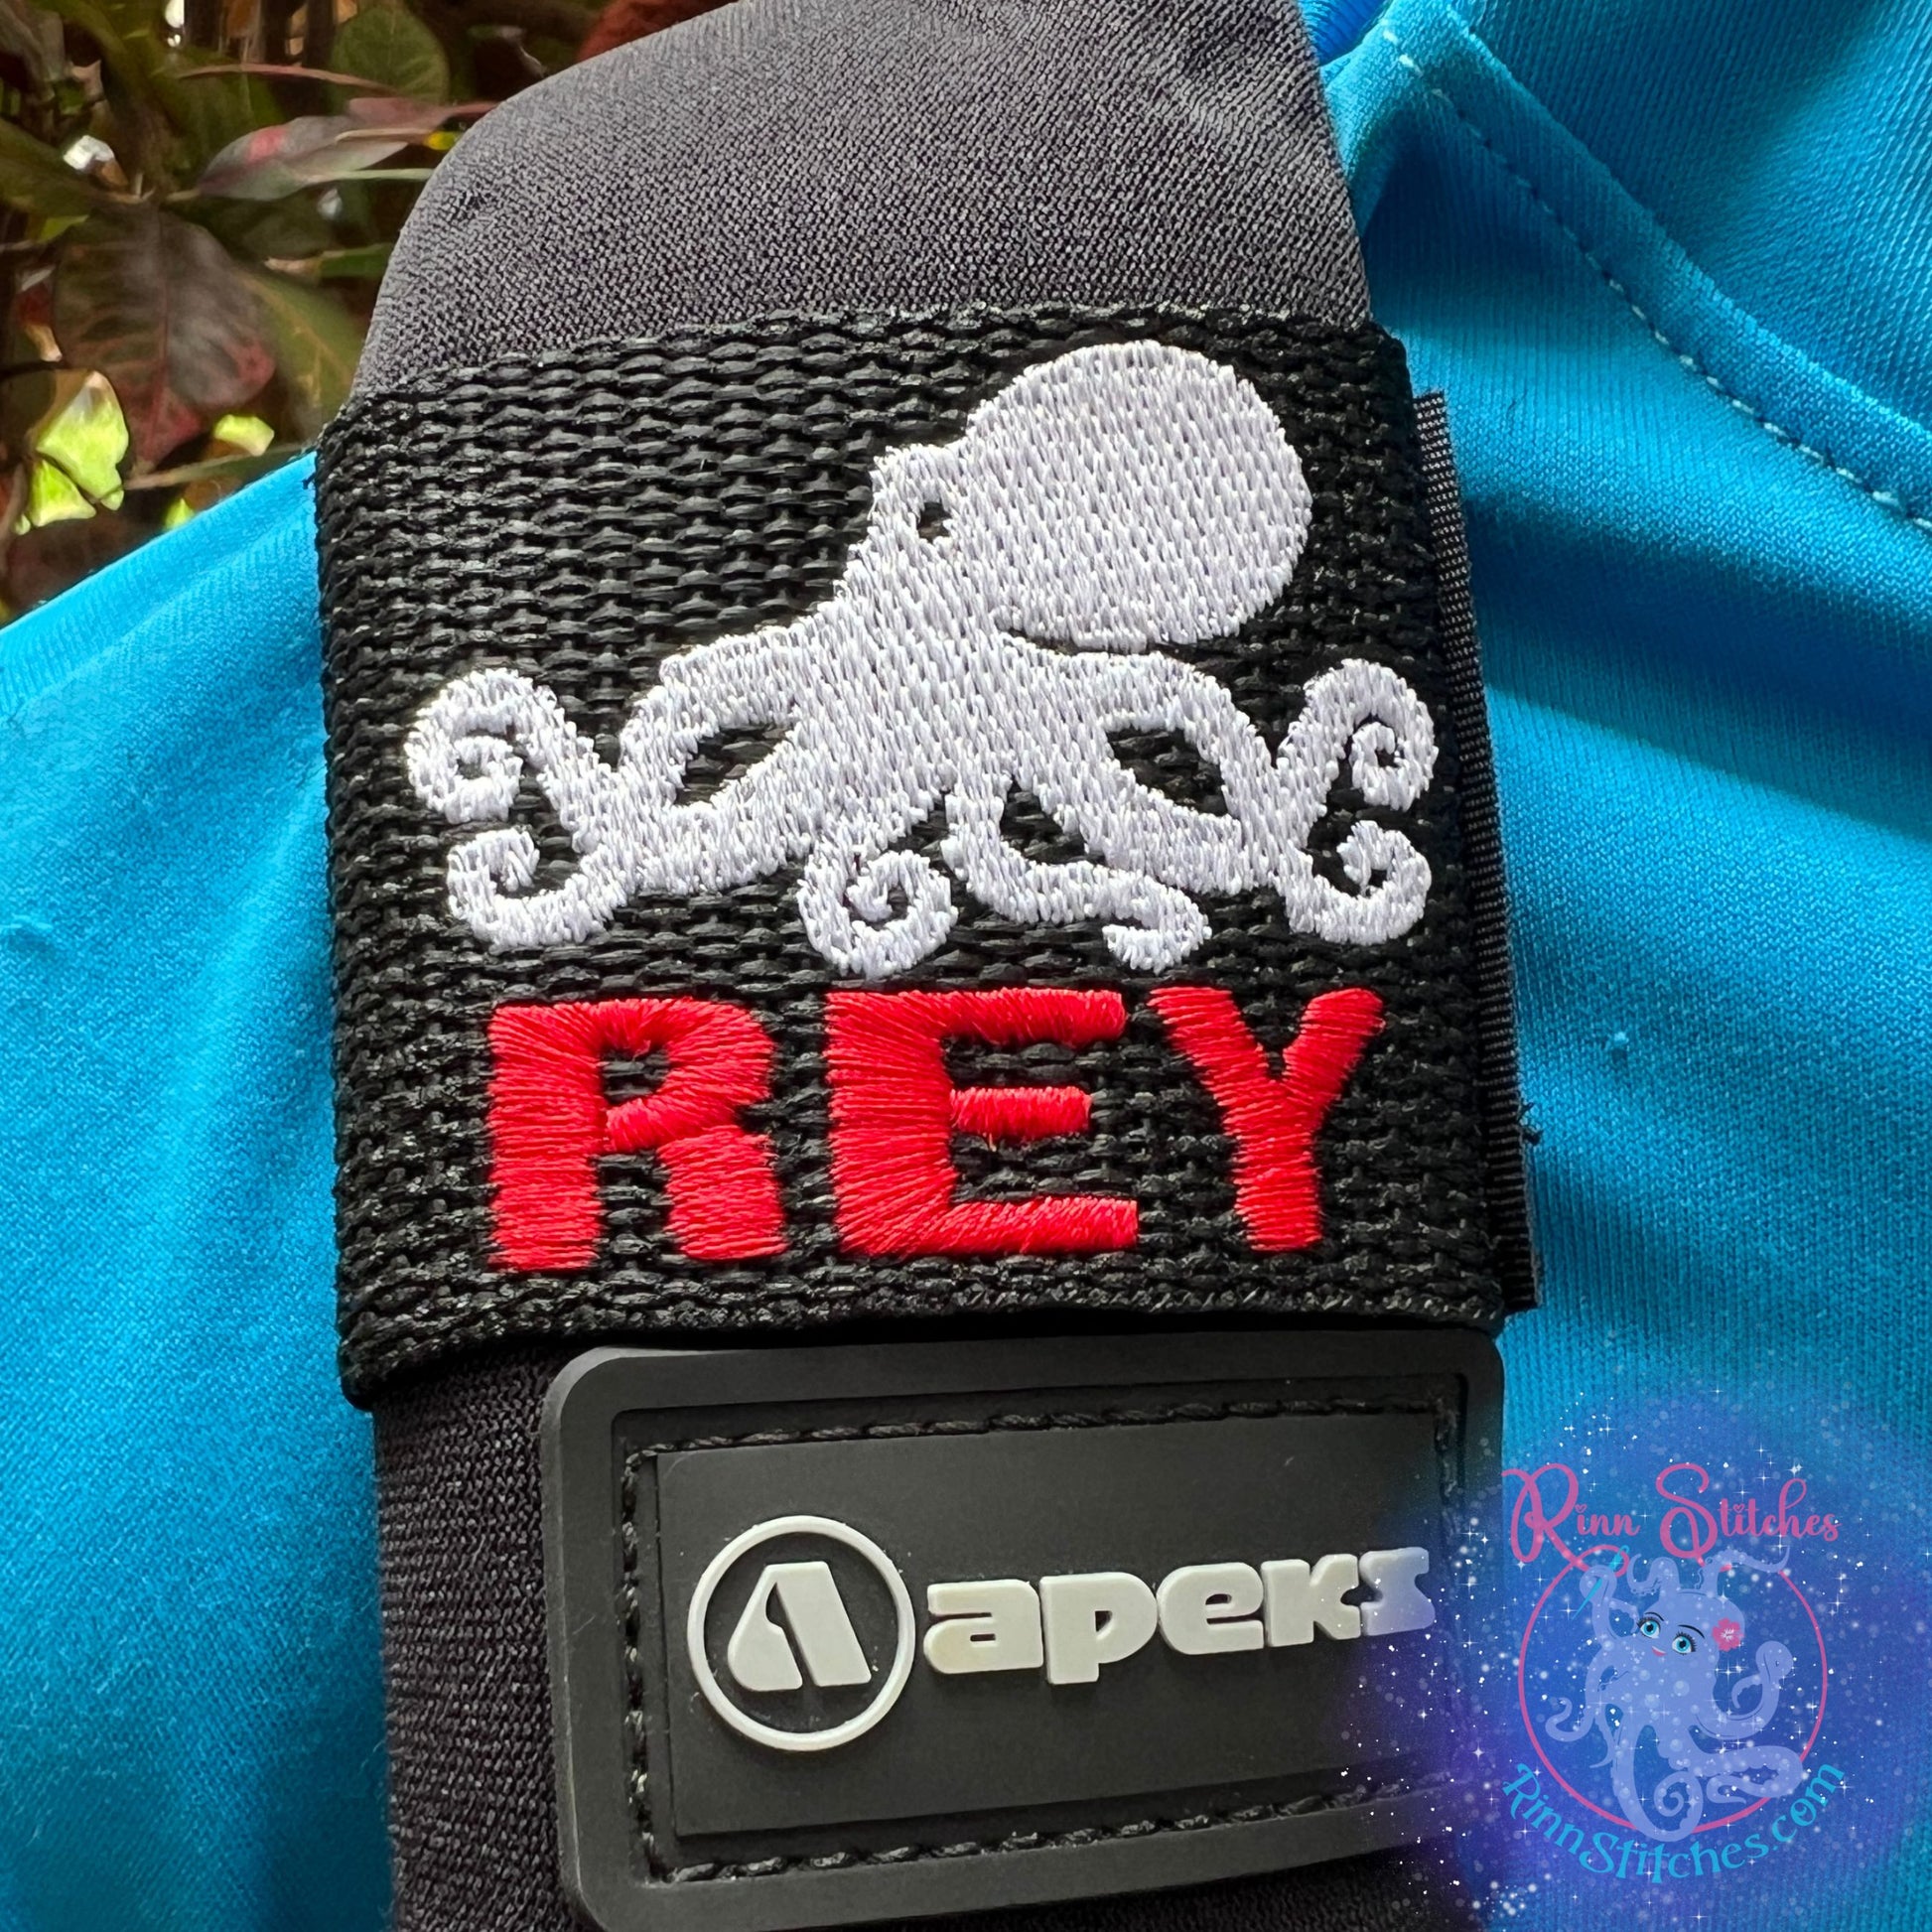 Tako (Octopus) | Personalized & Customizable Scuba Diver BCD Identification Tag | Made on Maui | Scuba Diver Gift | Rinn Stitches Creative & Unique Embroidery - Back Plate and Wing Size